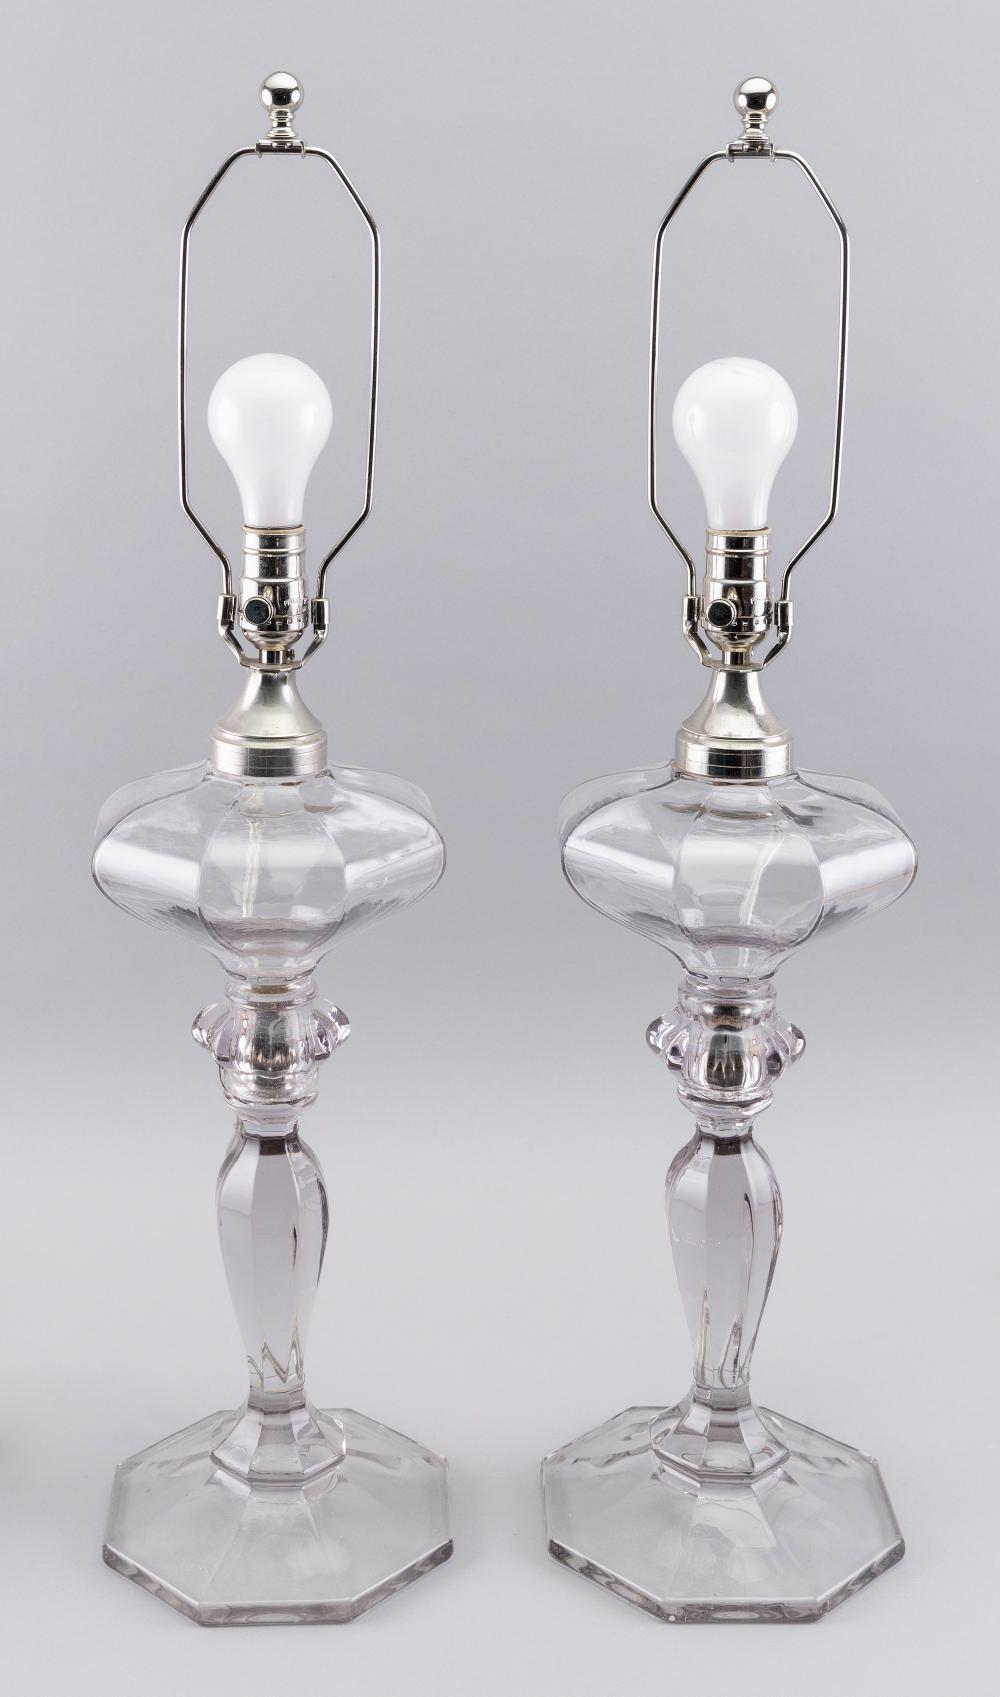 PAIR OF CLEAR GLASS BANQUET LAMPS 34f7e4